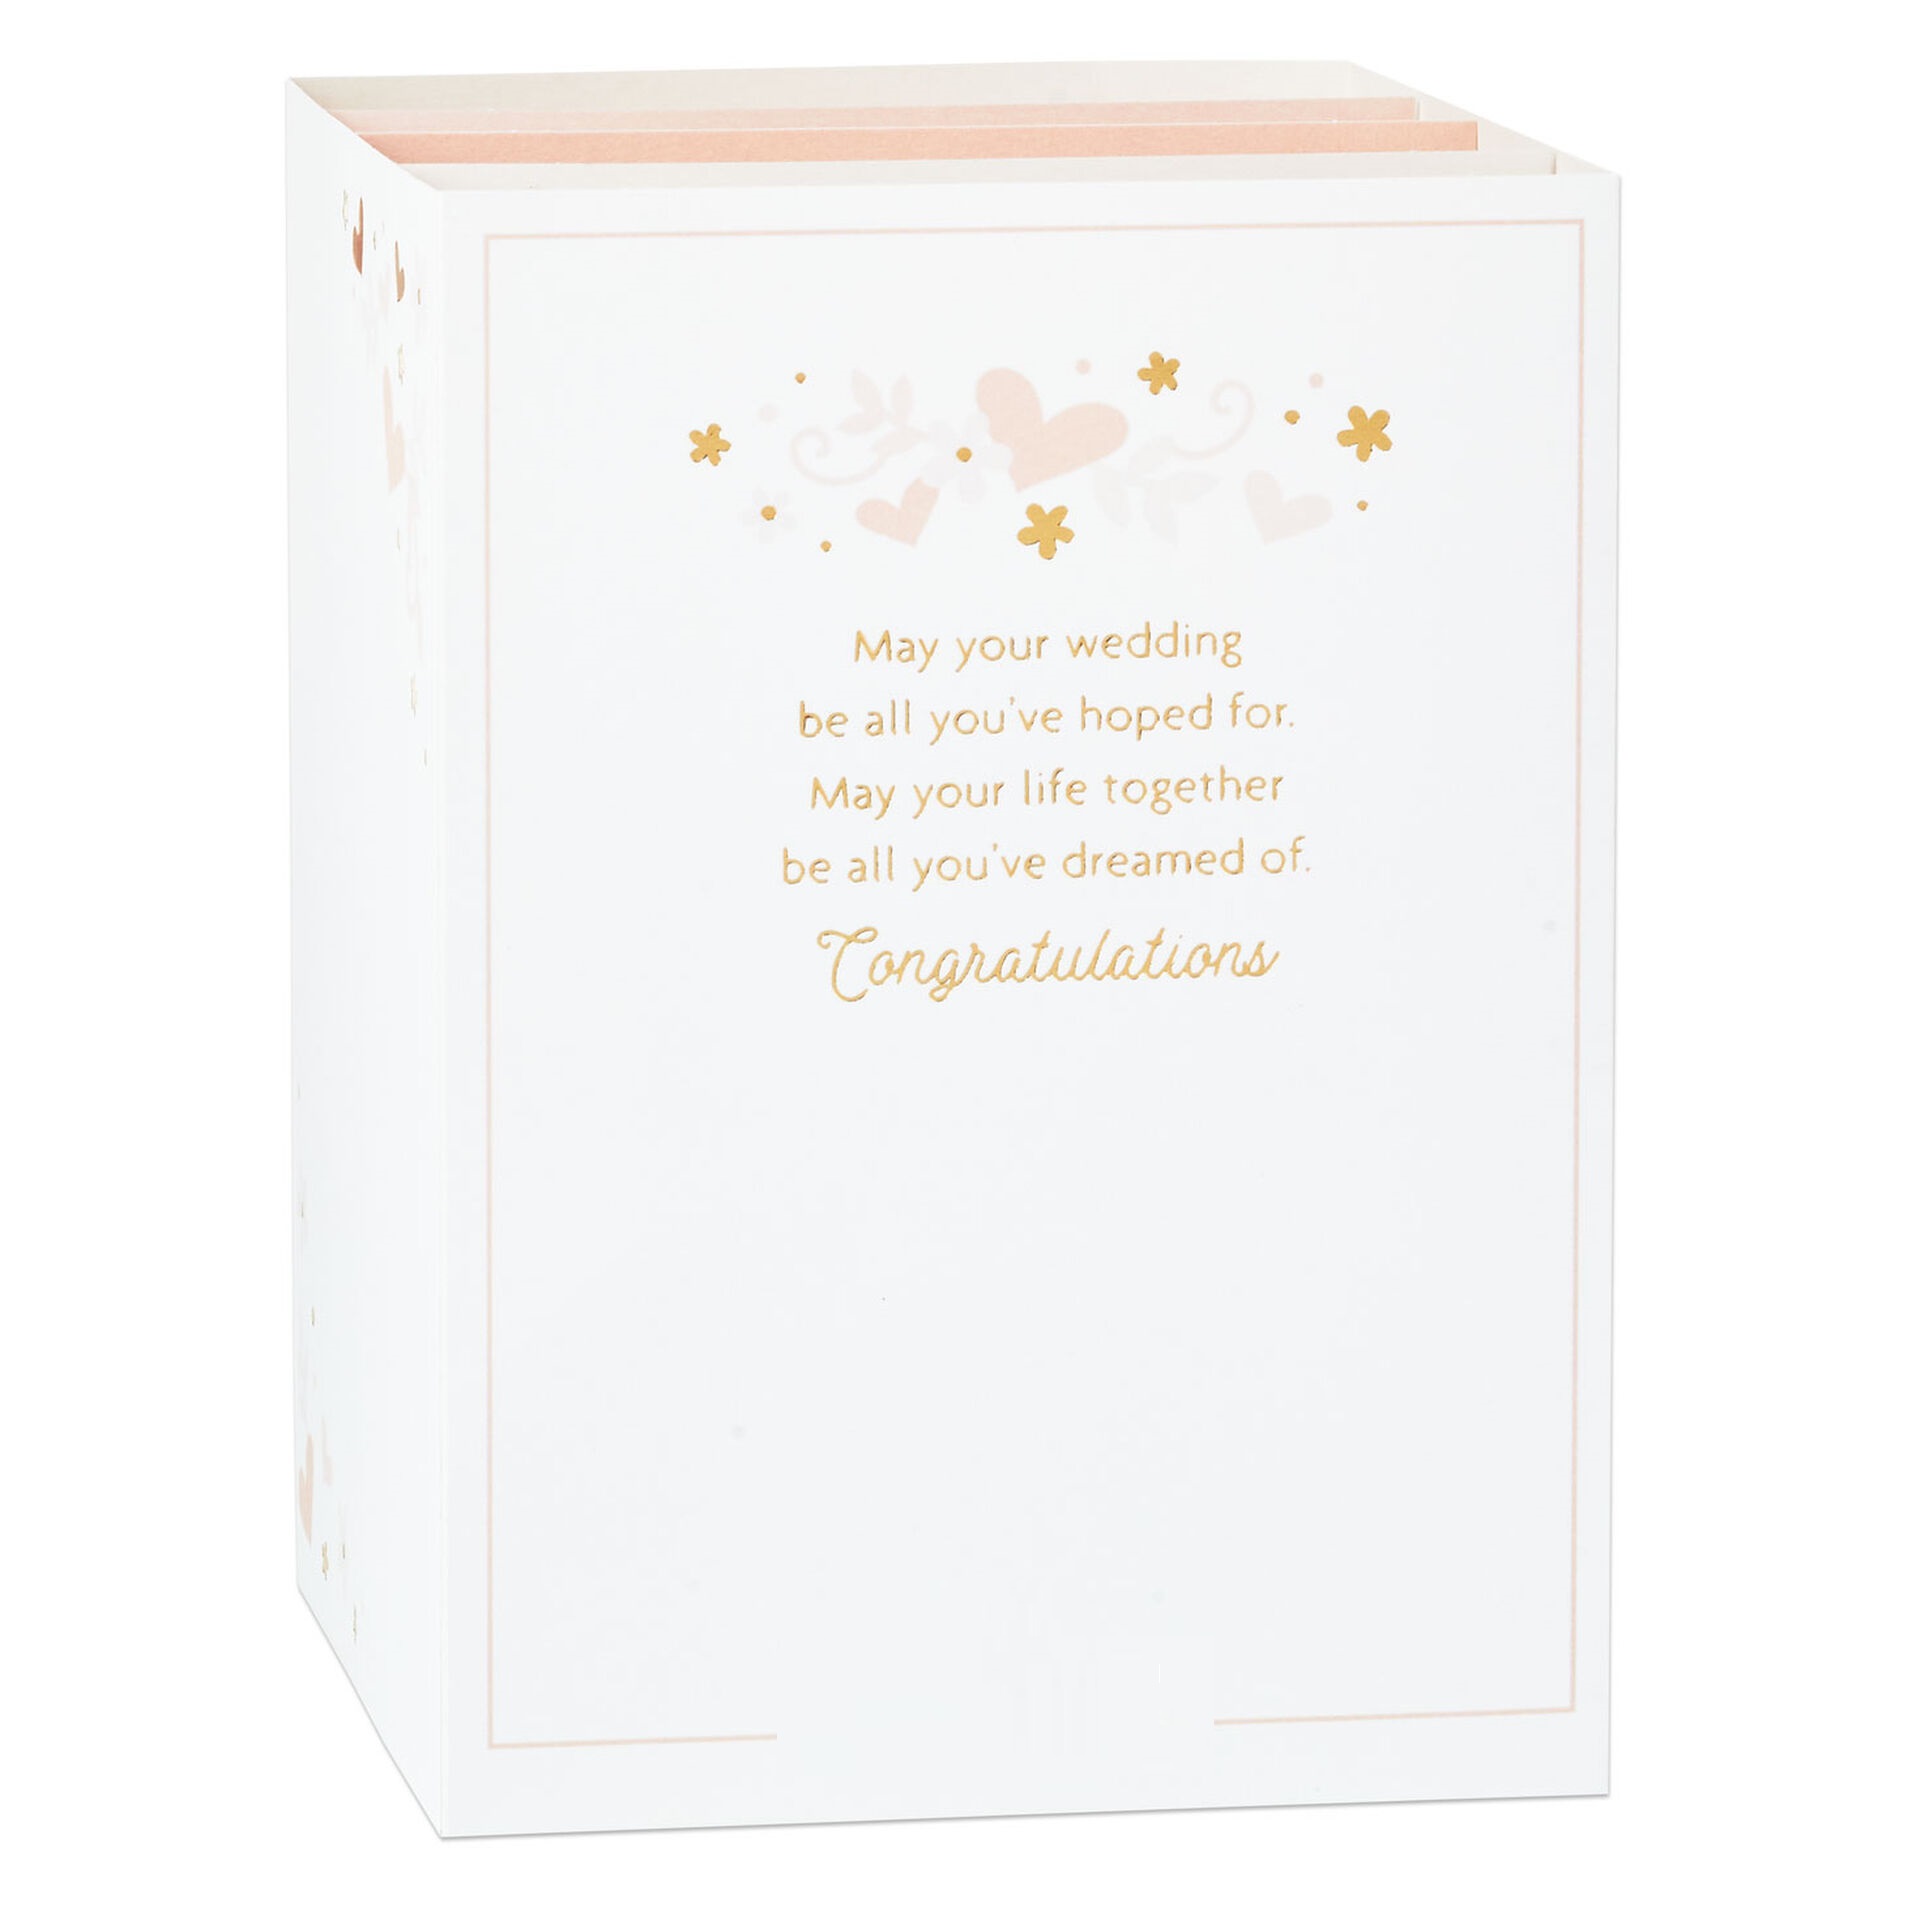 Mr.-and-Mrs.-3D-PopUp-Wedding-Card_899WDR1156_02